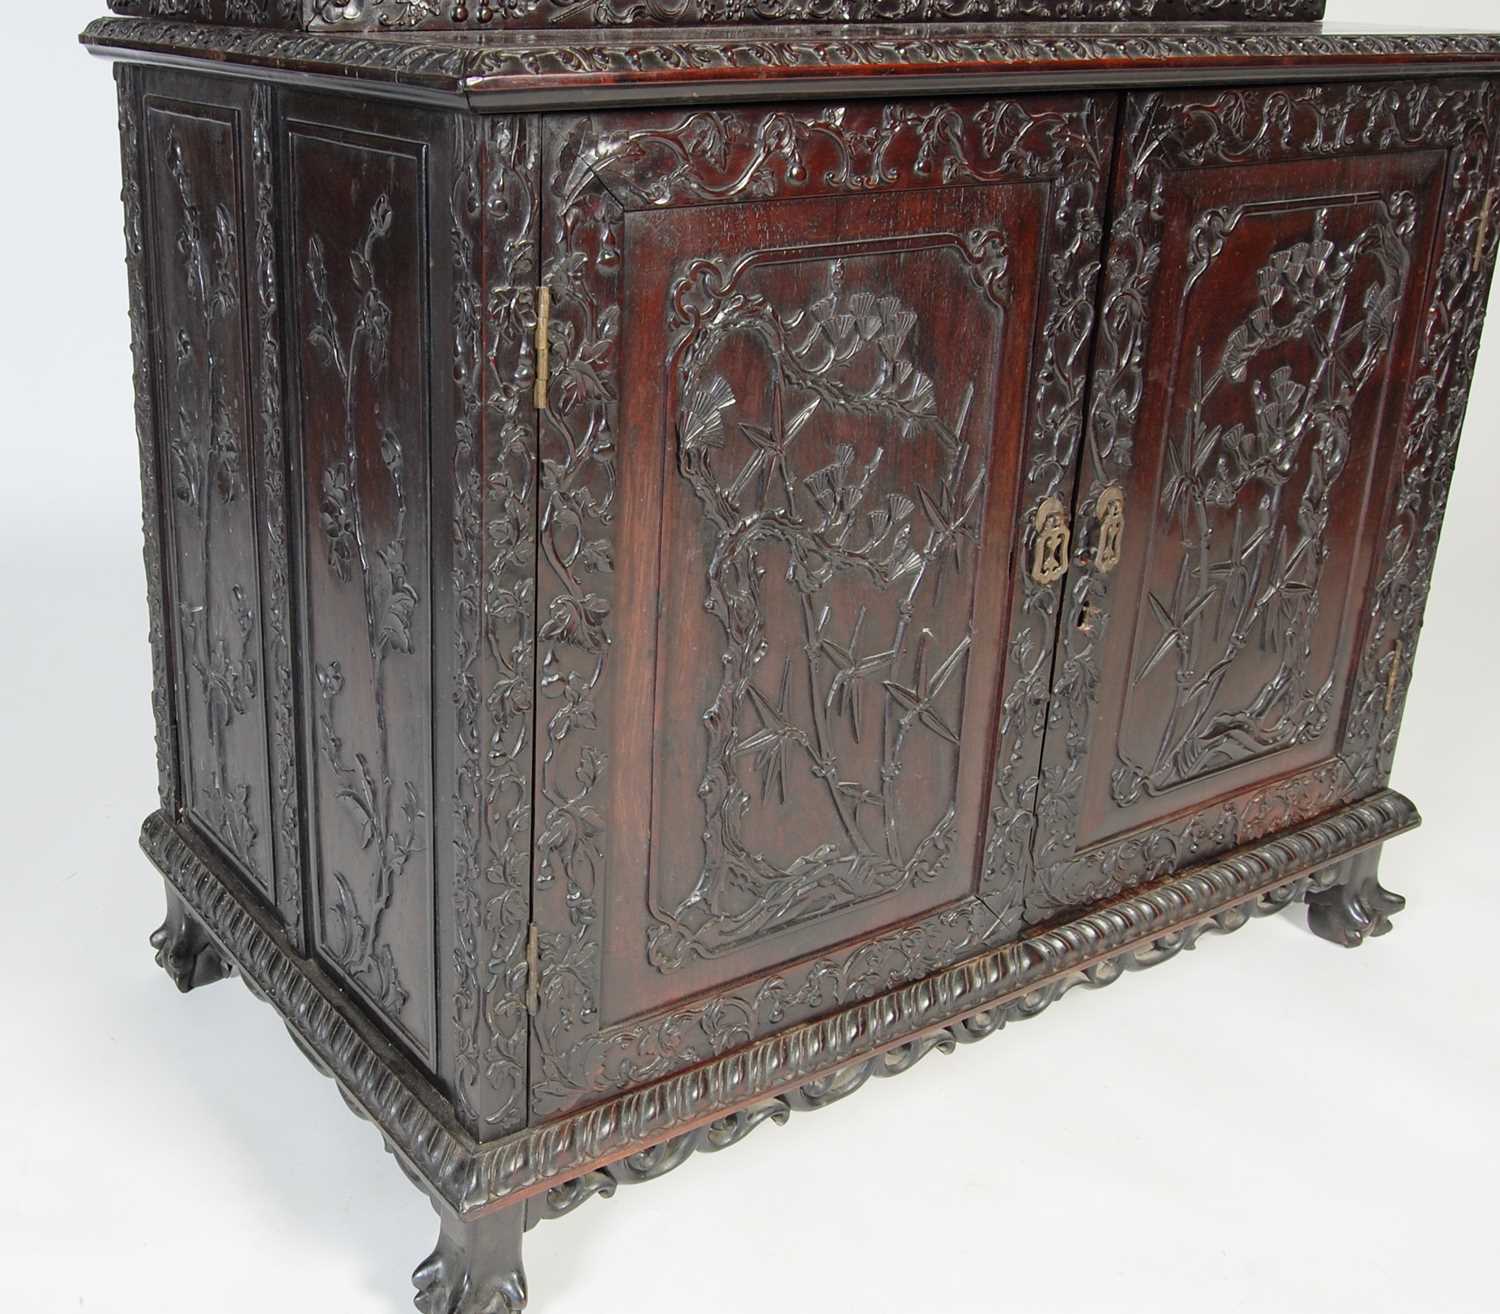 A Chinese dark wood display cabinet/ bookcase, late 19th/ early 20th century, the upper section with - Image 2 of 8